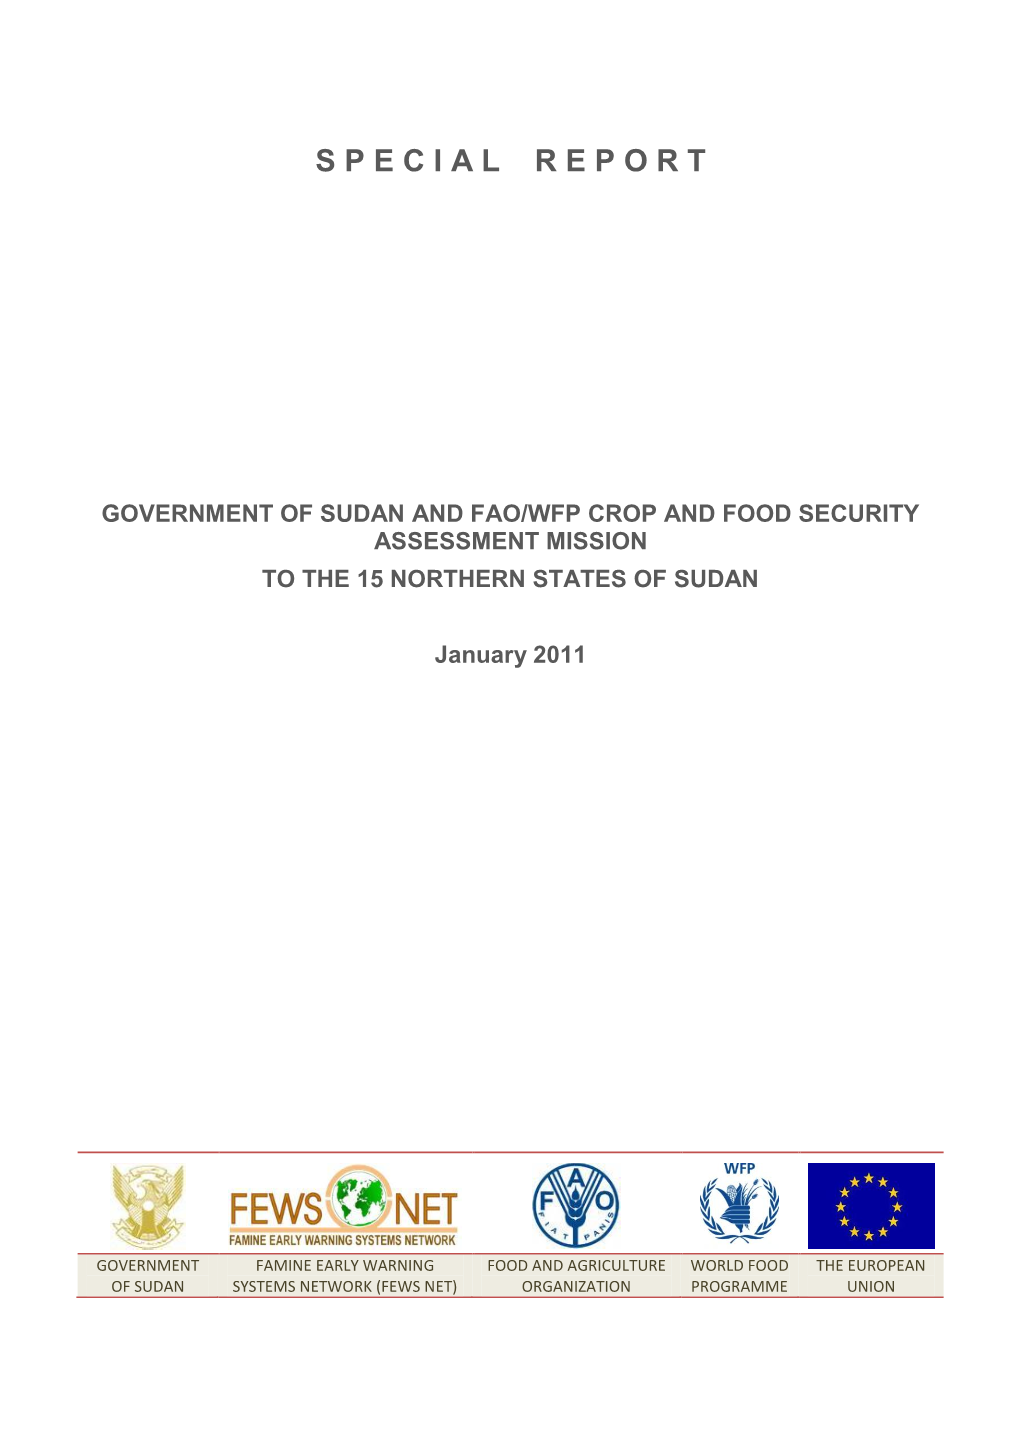 Crop and Food Security Assessment Mission (CFSAM) -January 2011